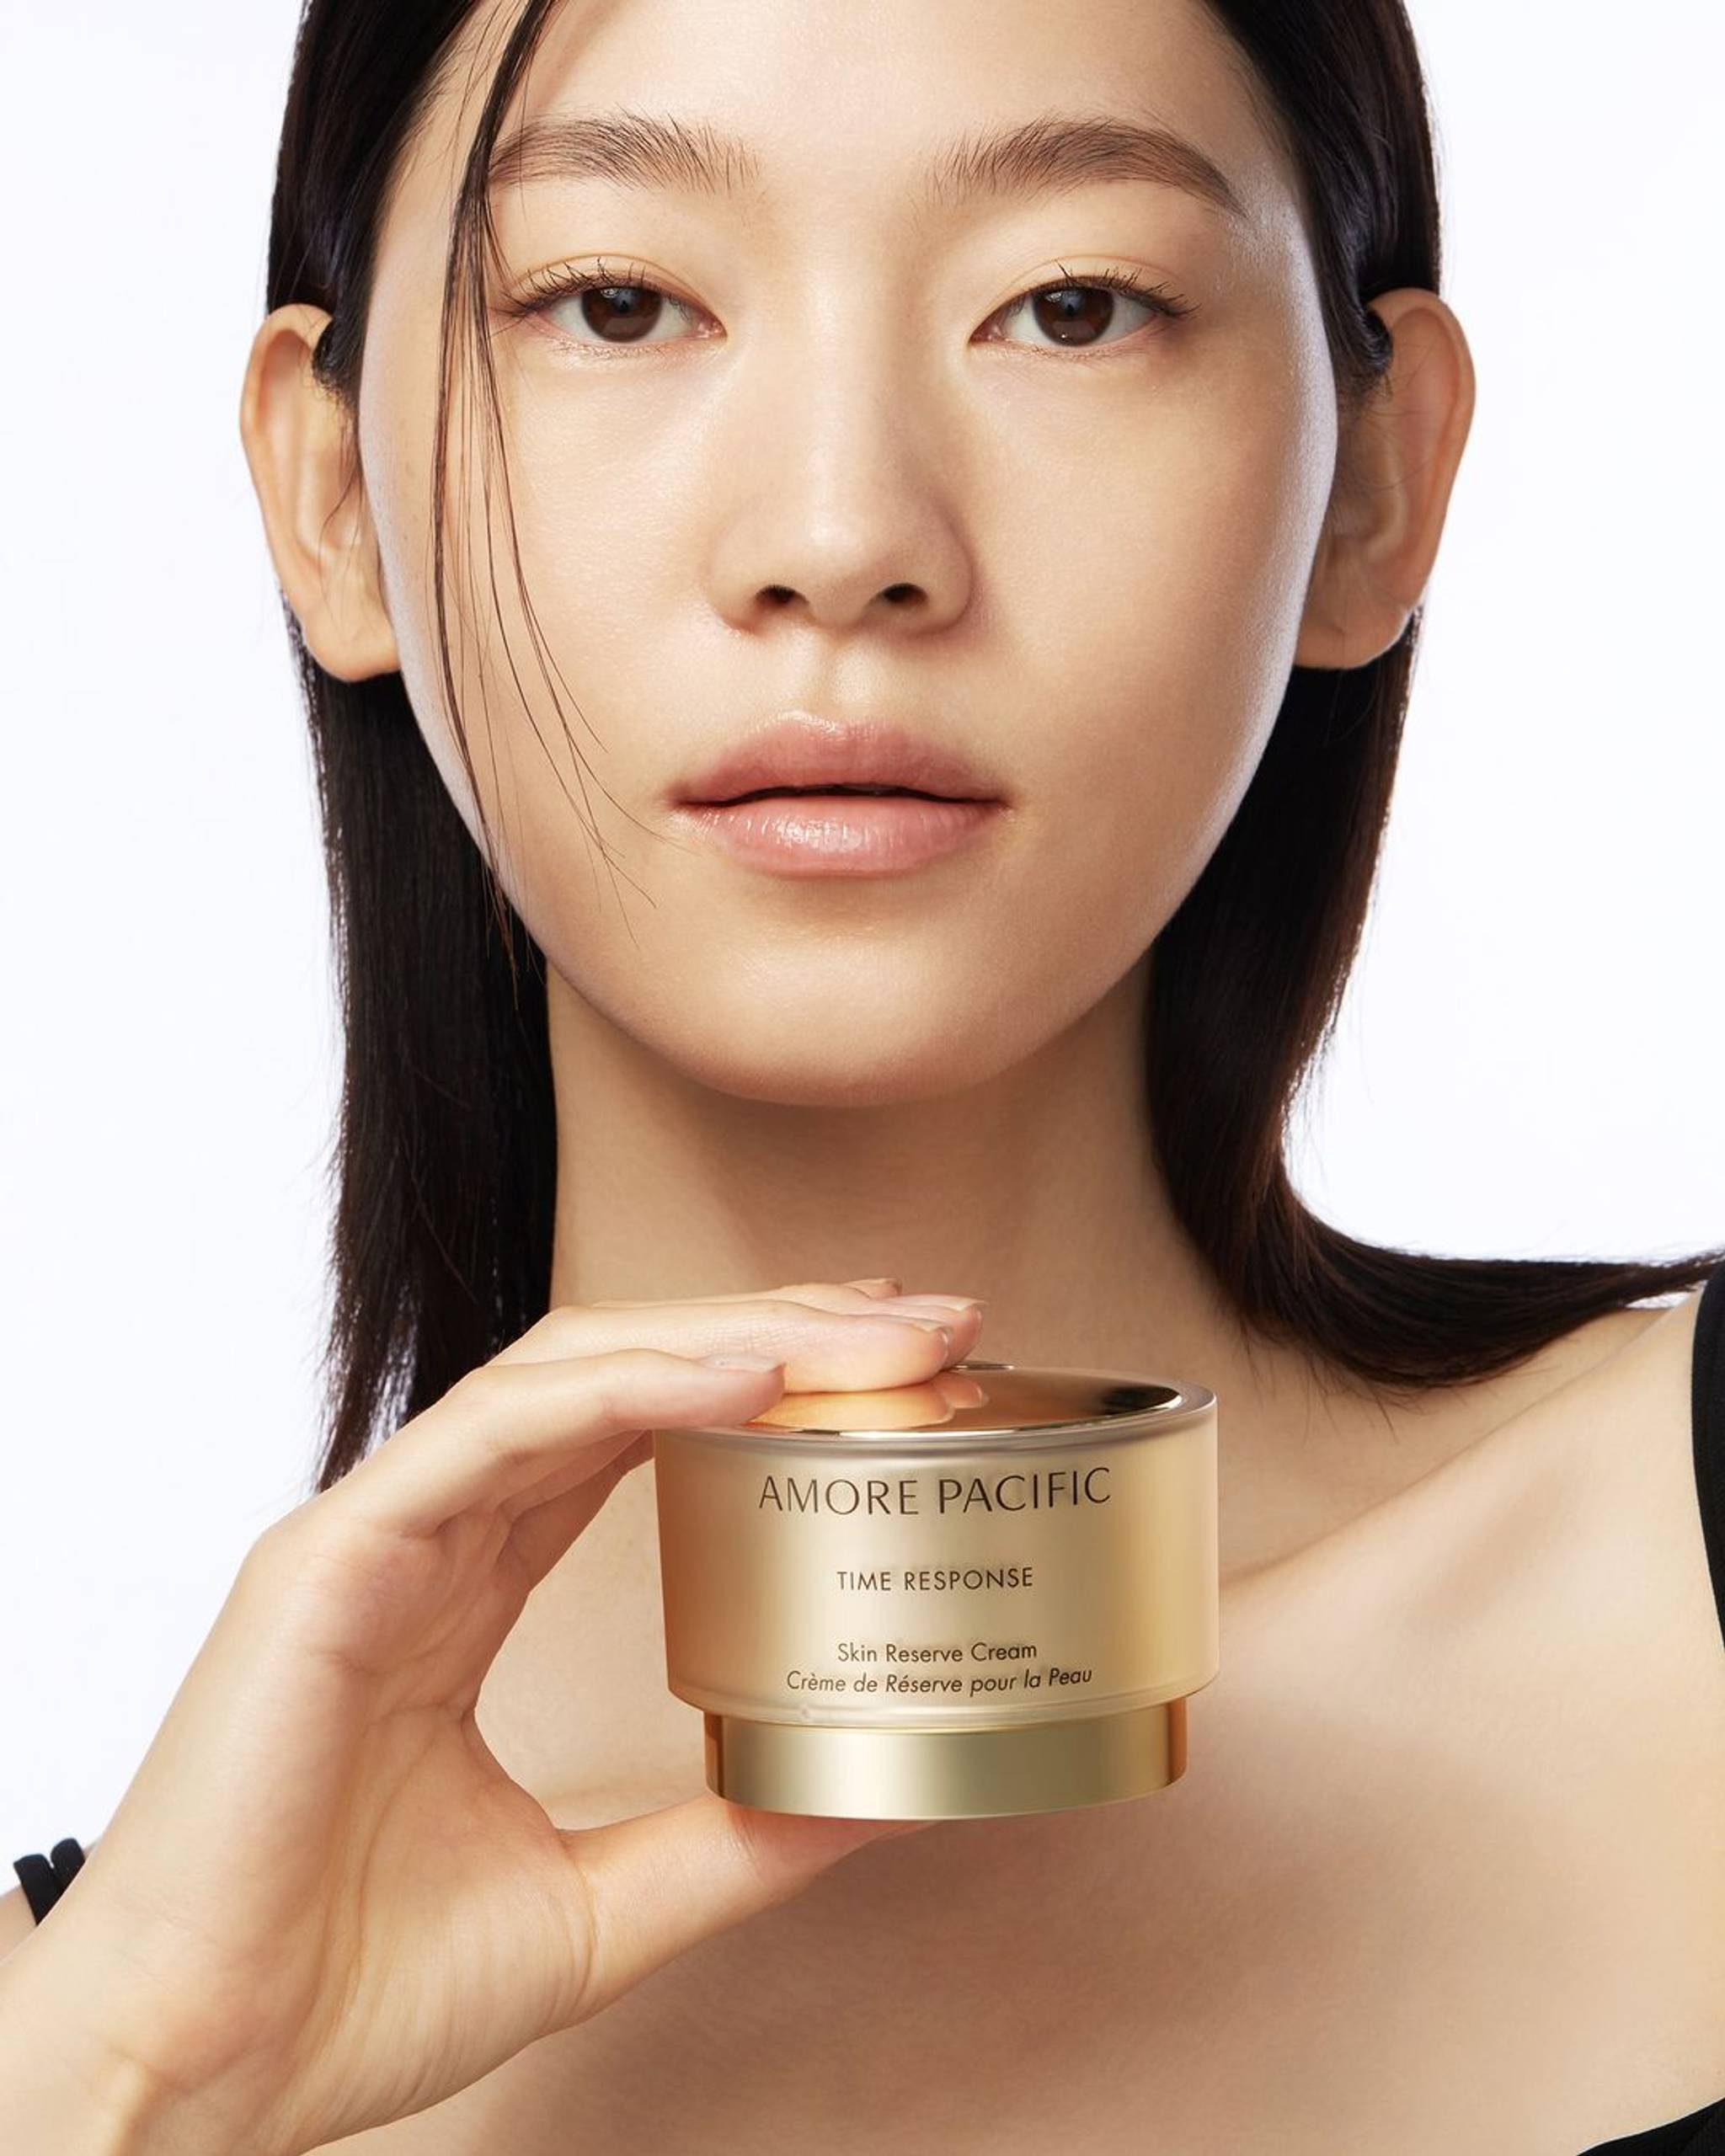 A deep-dive into the success of personalised K-beauty